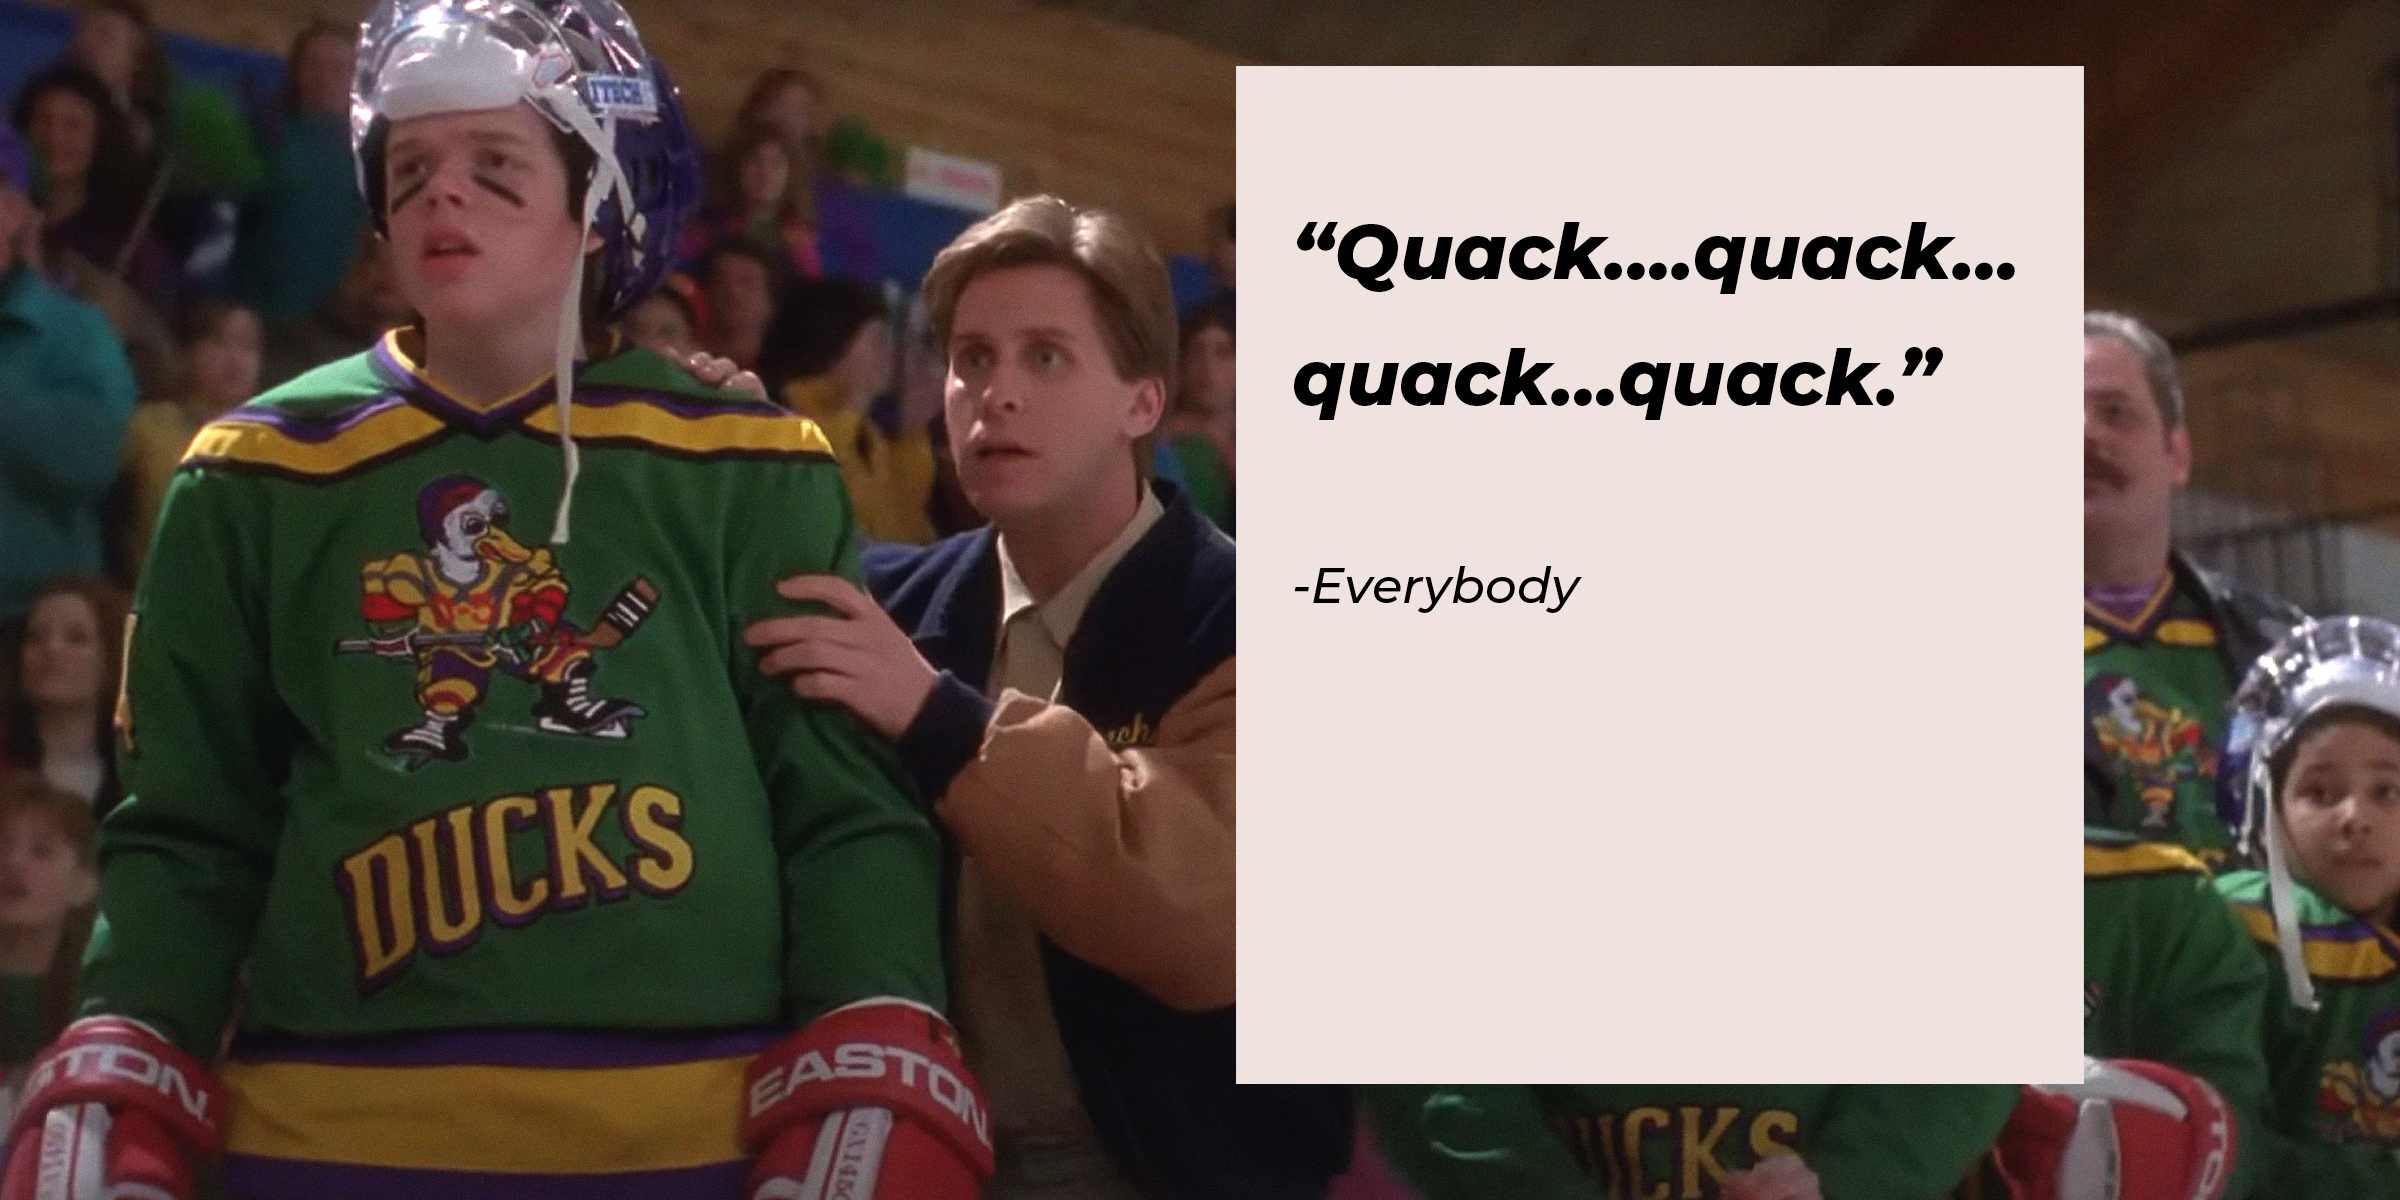 A picture of 'The Mighty Ducks' team mates with a quote by everybody: “Quack….quack…quack…quack.” | Source: youtube.com/disneyplus